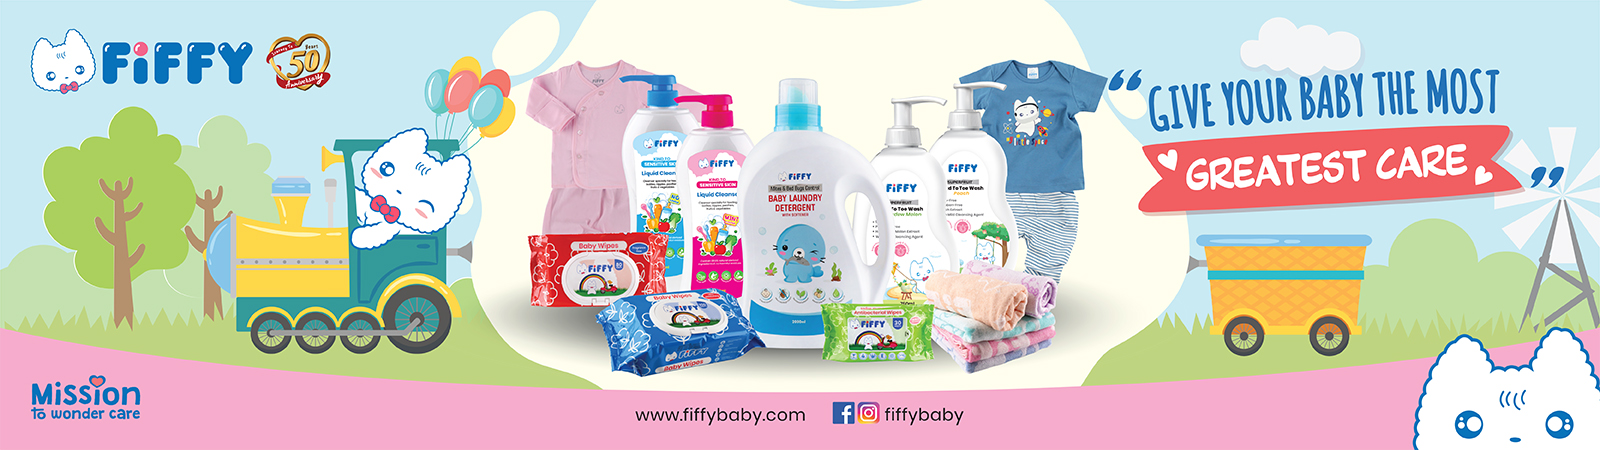 Fiffy Baby Liquid Cleanser: Let’s not take chances with your baby’s things